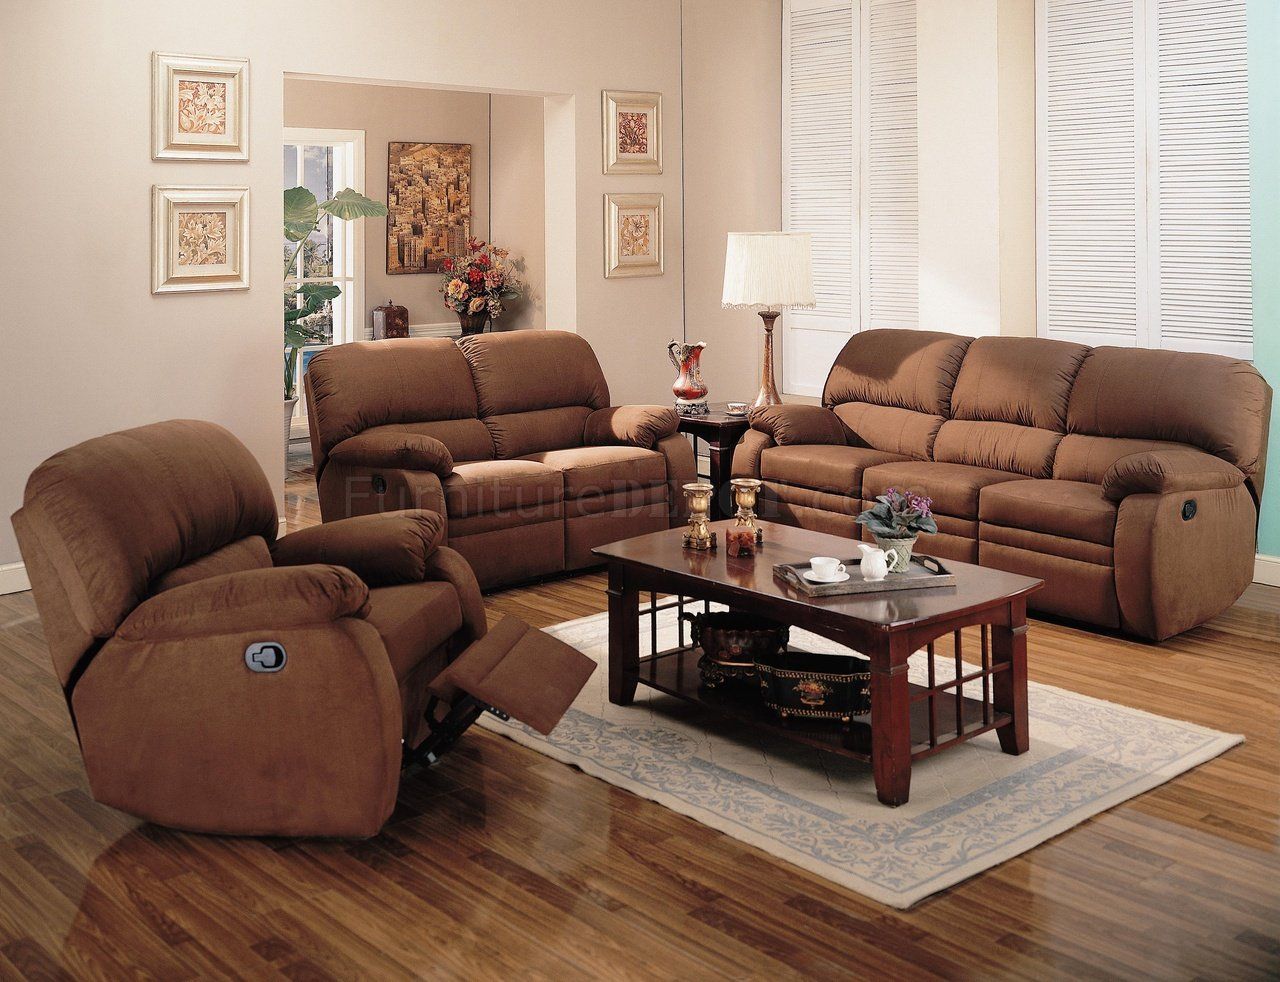 Soft Chocolate Microfiber Reclining Living Room Sofa W/options With 2 Tone Chocolate Microfiber Sofas (Gallery 8 of 20)